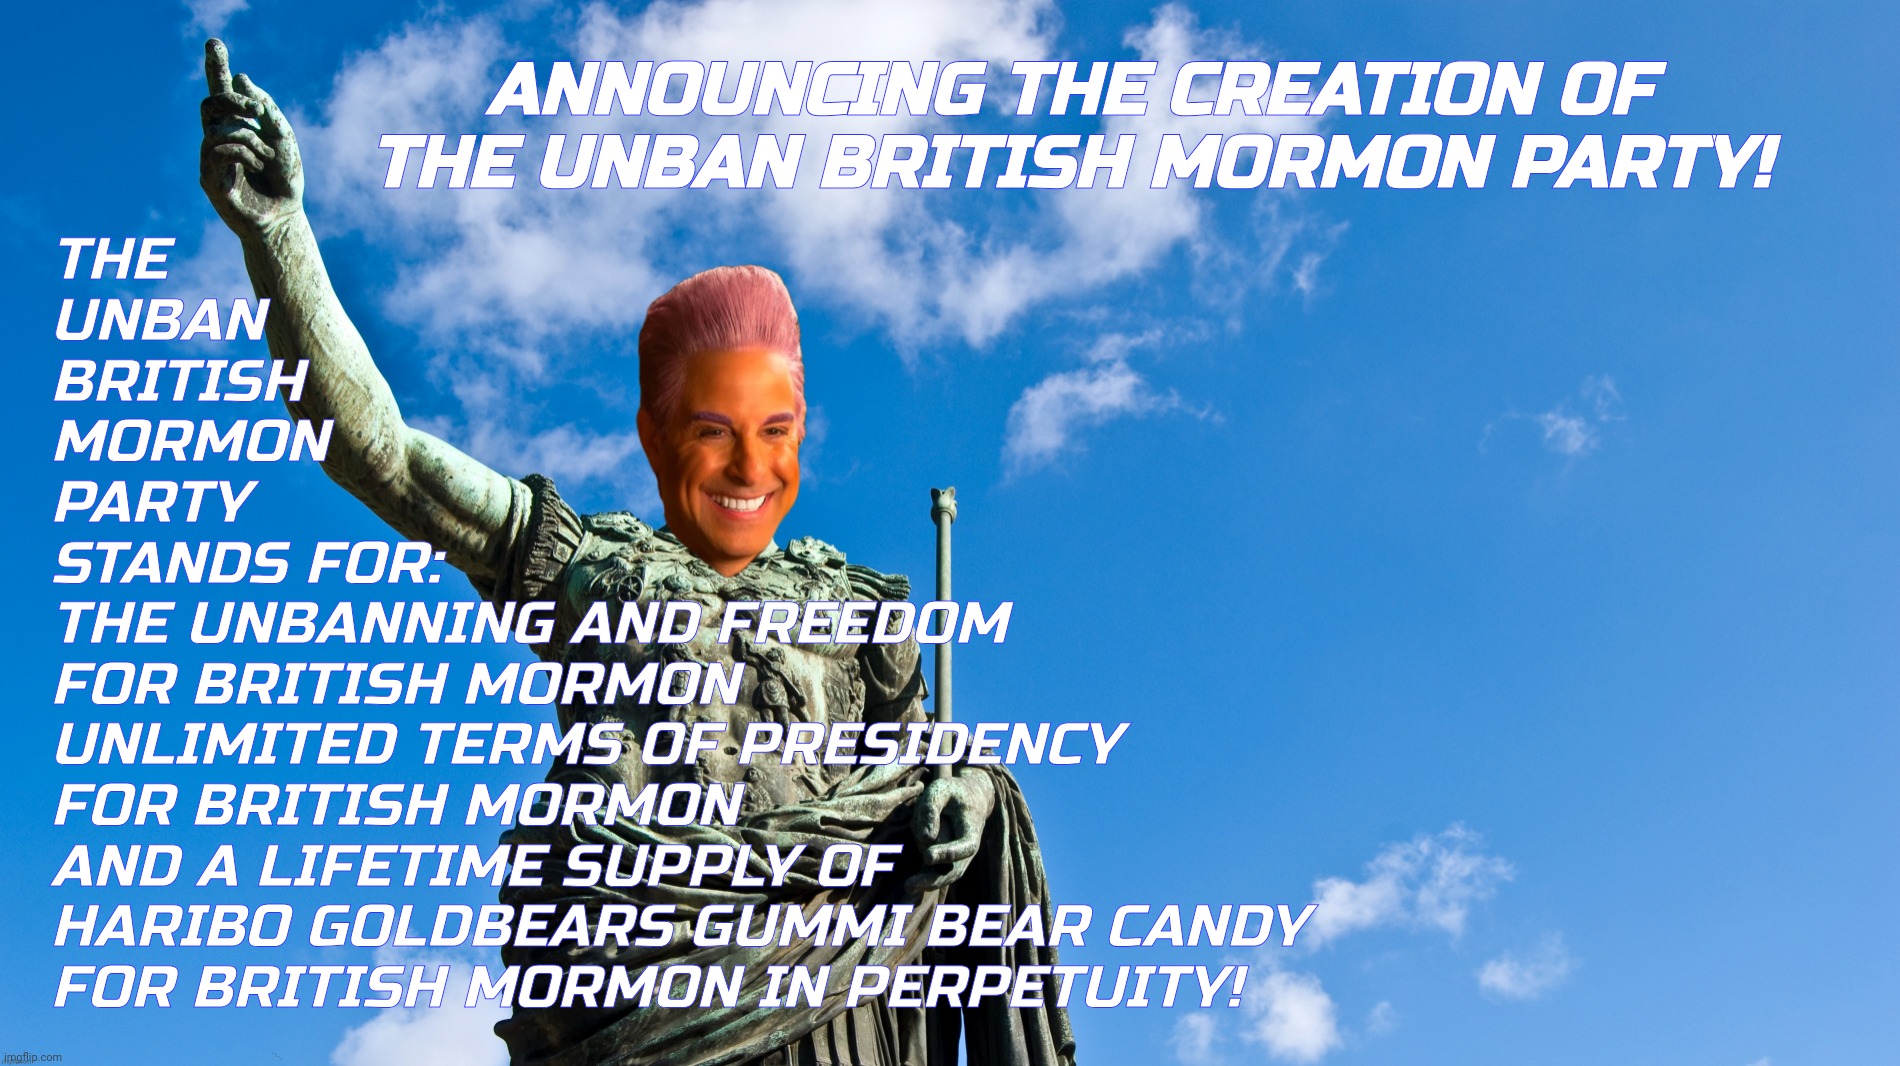 SPECIAL ANNOUNCEMENT ANNOUNCING THE CREATION OF THE UNBAN BRITISH MORMON PARTY PARTY | ANNOUNCING THE CREATION OF THE UNBAN BRITISH MORMON PARTY! THE
UNBAN
BRITISH
MORMON
PARTY
STANDS FOR:
THE UNBANNING AND FREEDOM
FOR BRITISH MORMON
UNLIMITED TERMS OF PRESIDENCY
FOR BRITISH MORMON
AND A LIFETIME SUPPLY OF
HARIBO GOLDBEARS GUMMI BEAR CANDY
FOR BRITISH MORMON IN PERPETUITY! | image tagged in announcing the creation of the unban british mormon party,the unban british mormon party,unban british mormon,british mormon | made w/ Imgflip meme maker